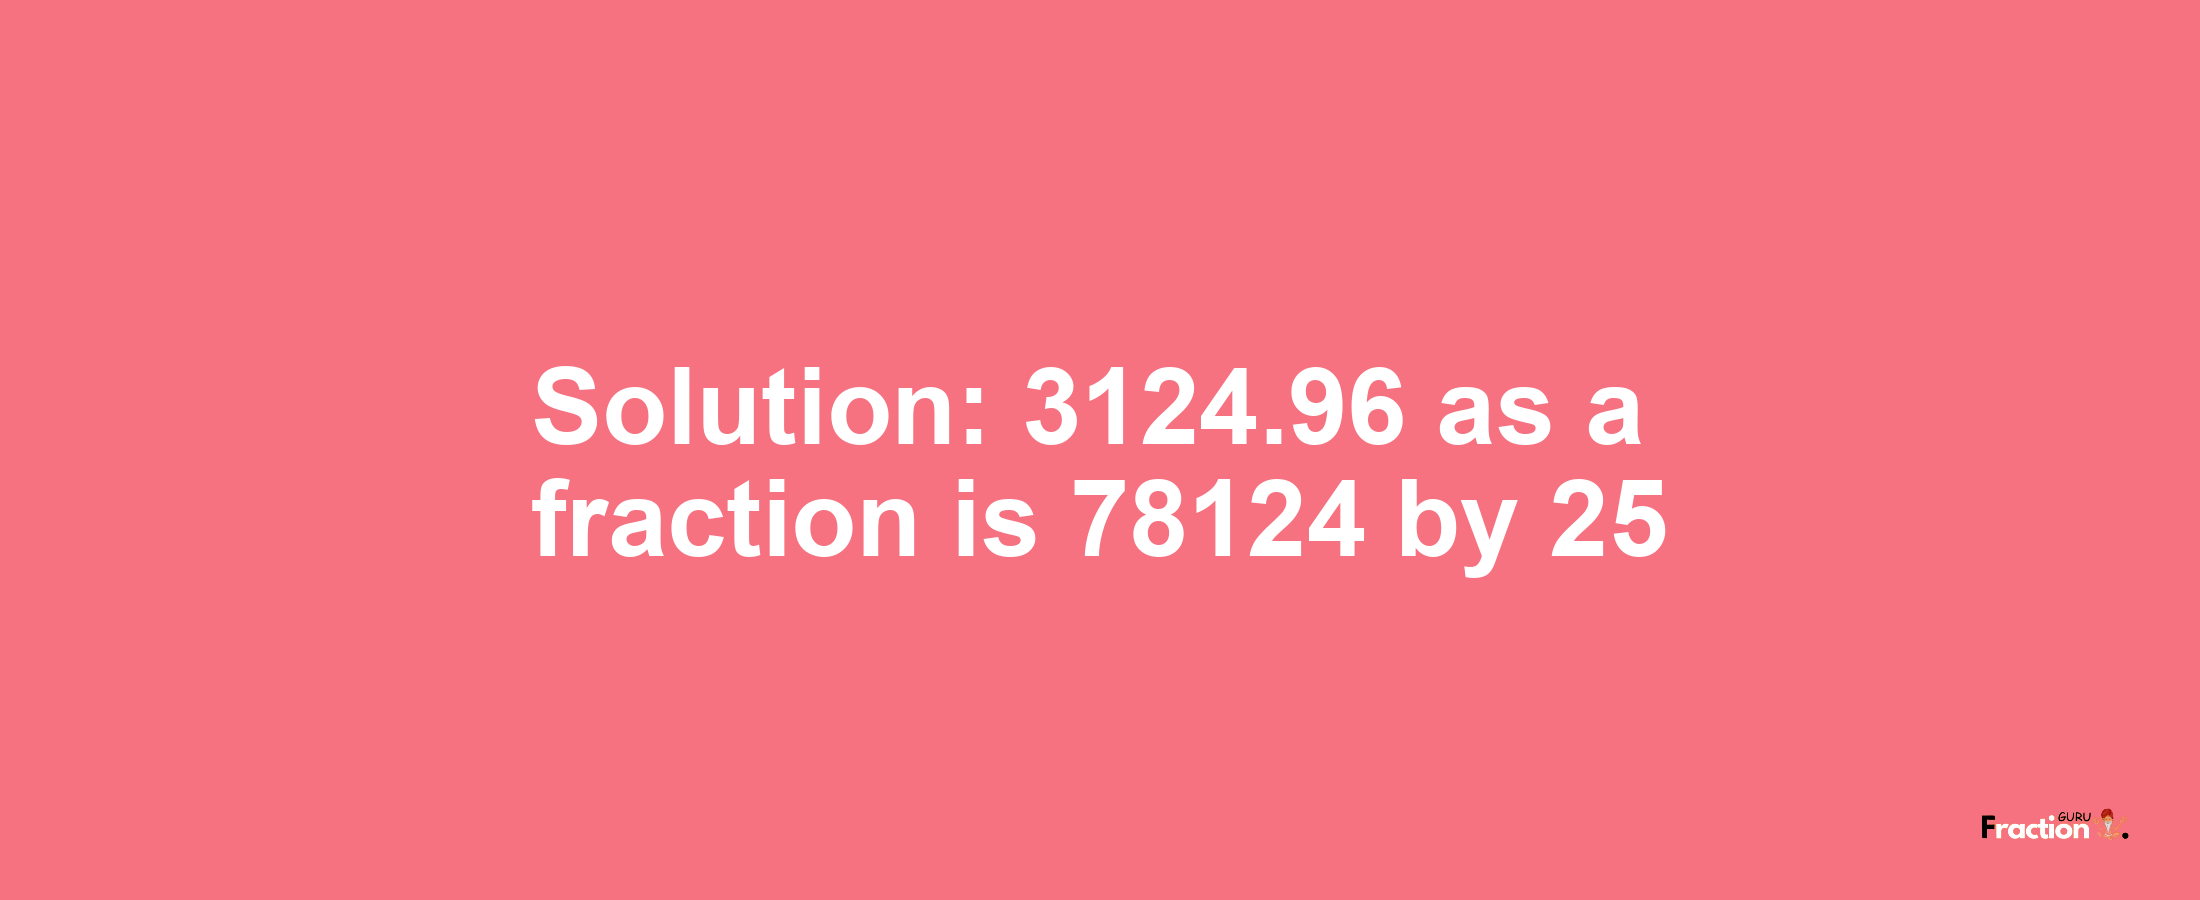 Solution:3124.96 as a fraction is 78124/25